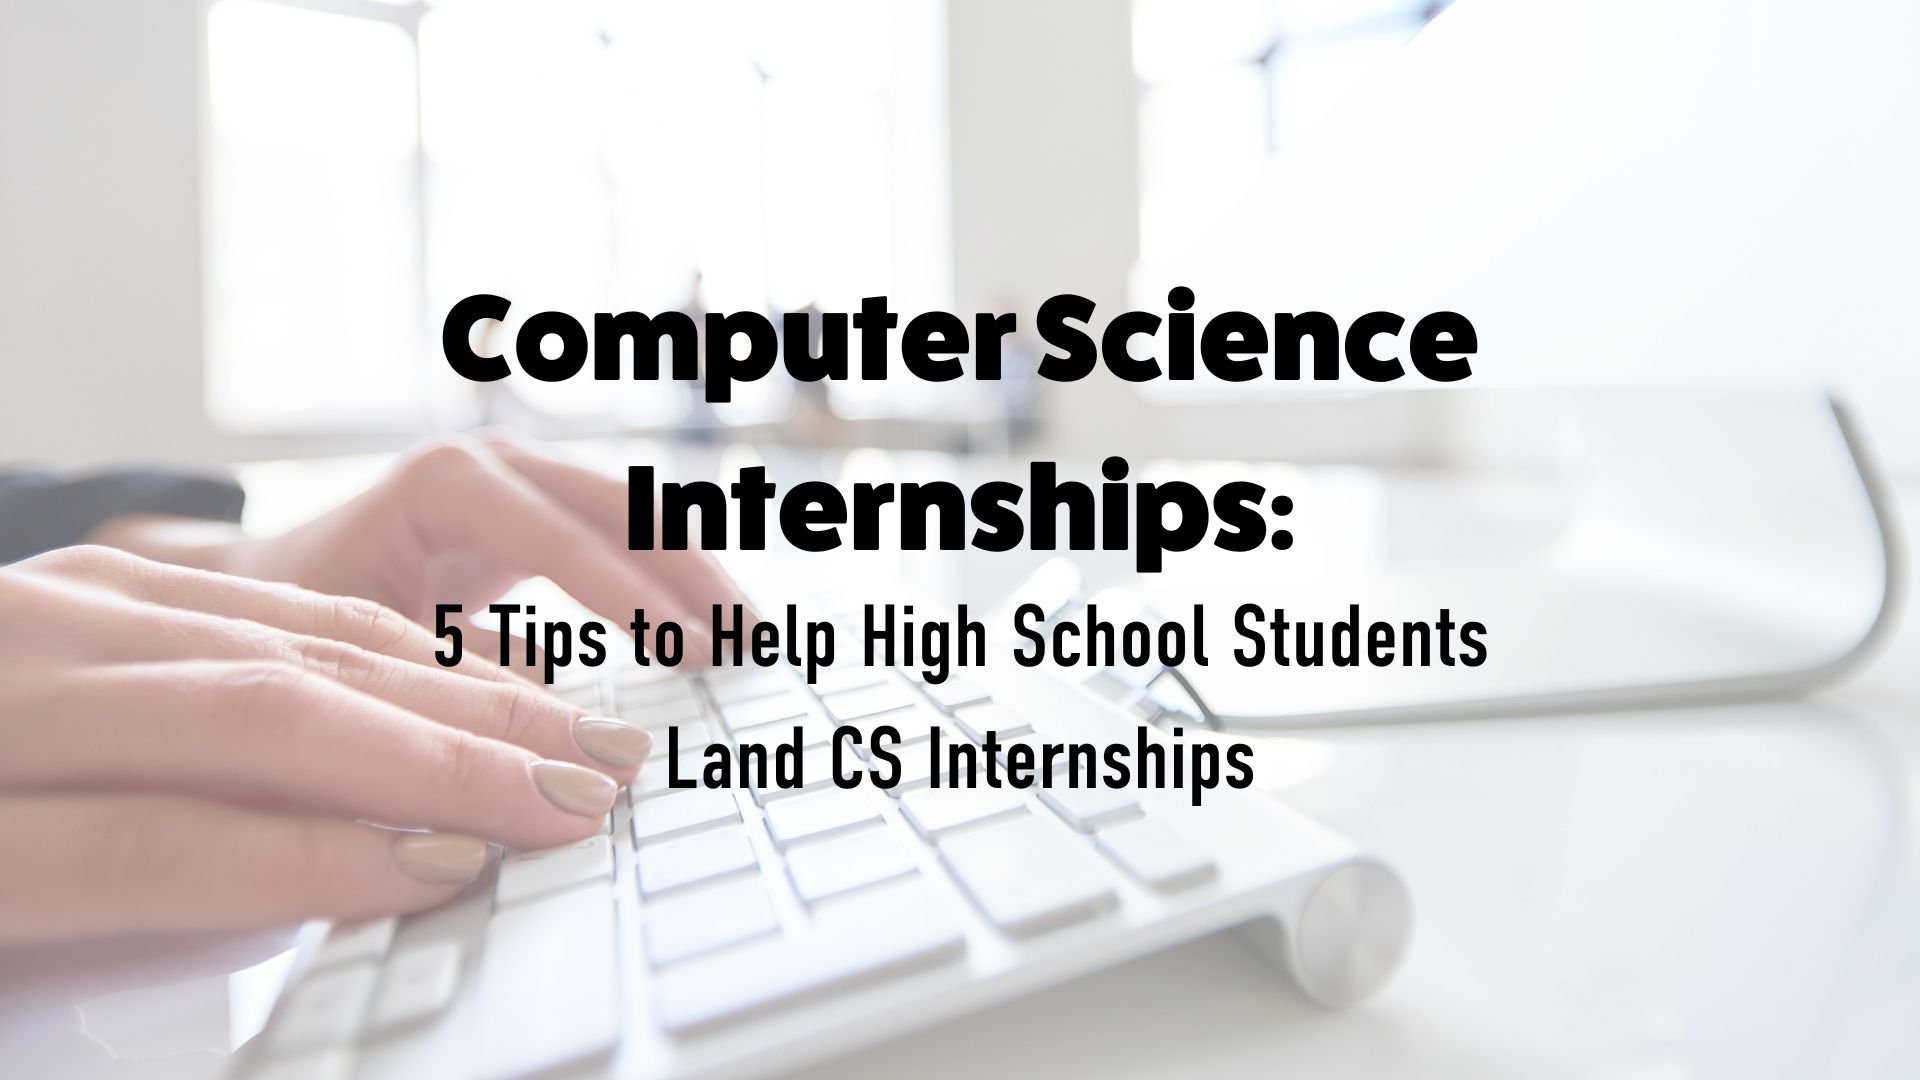 5 Tips to Help High School Students Land Computer Science Internships